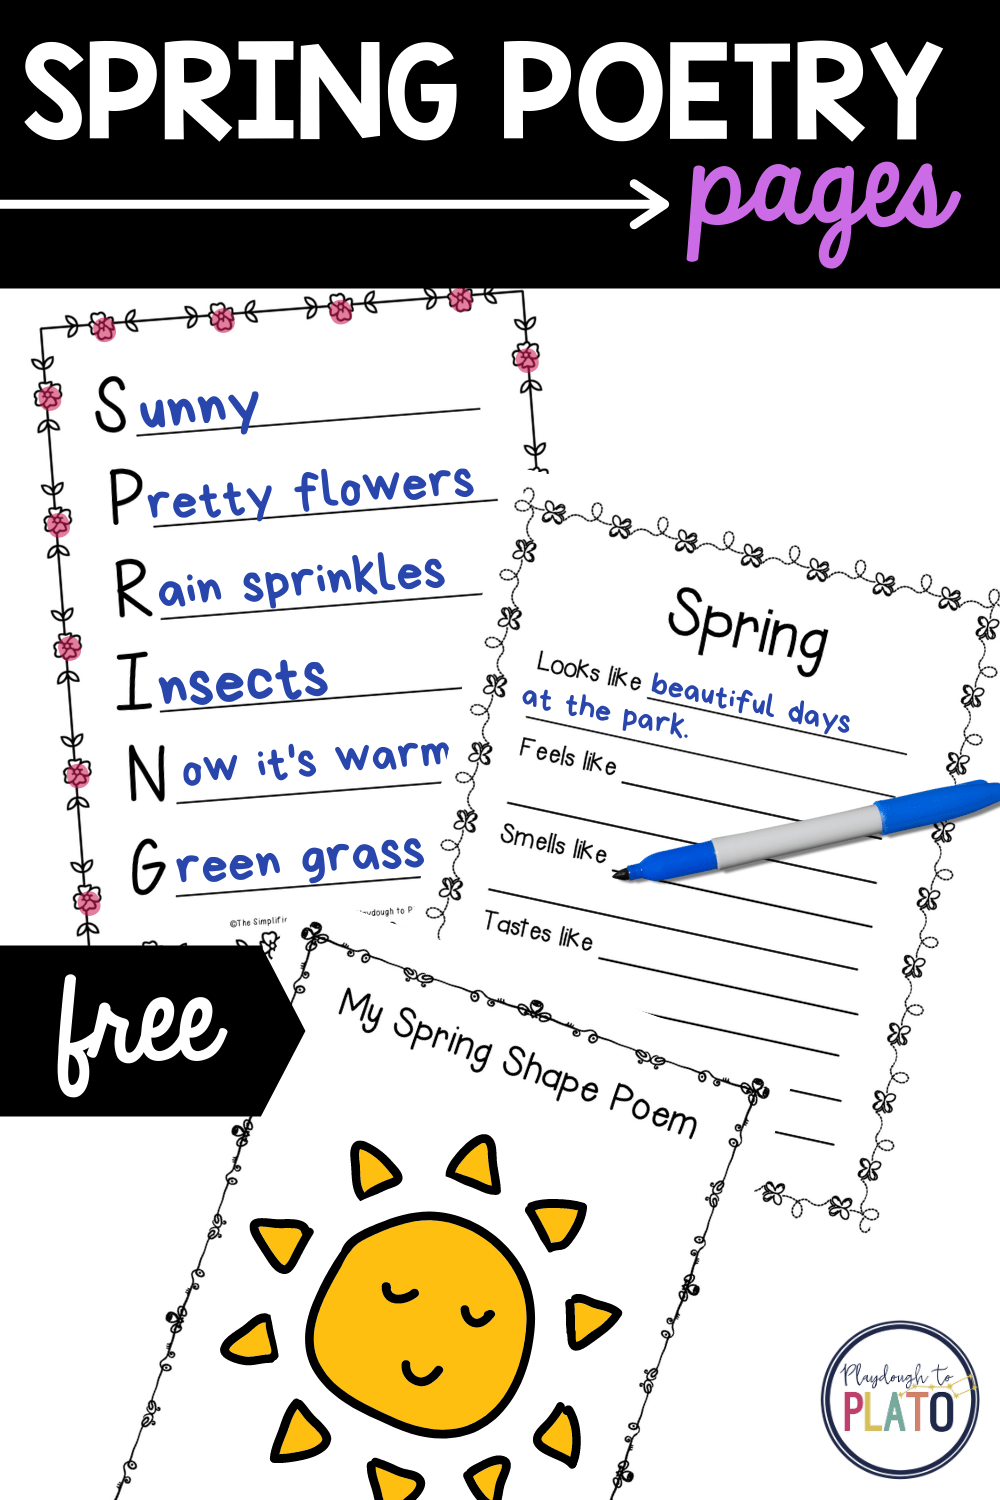 Spring poetry pages